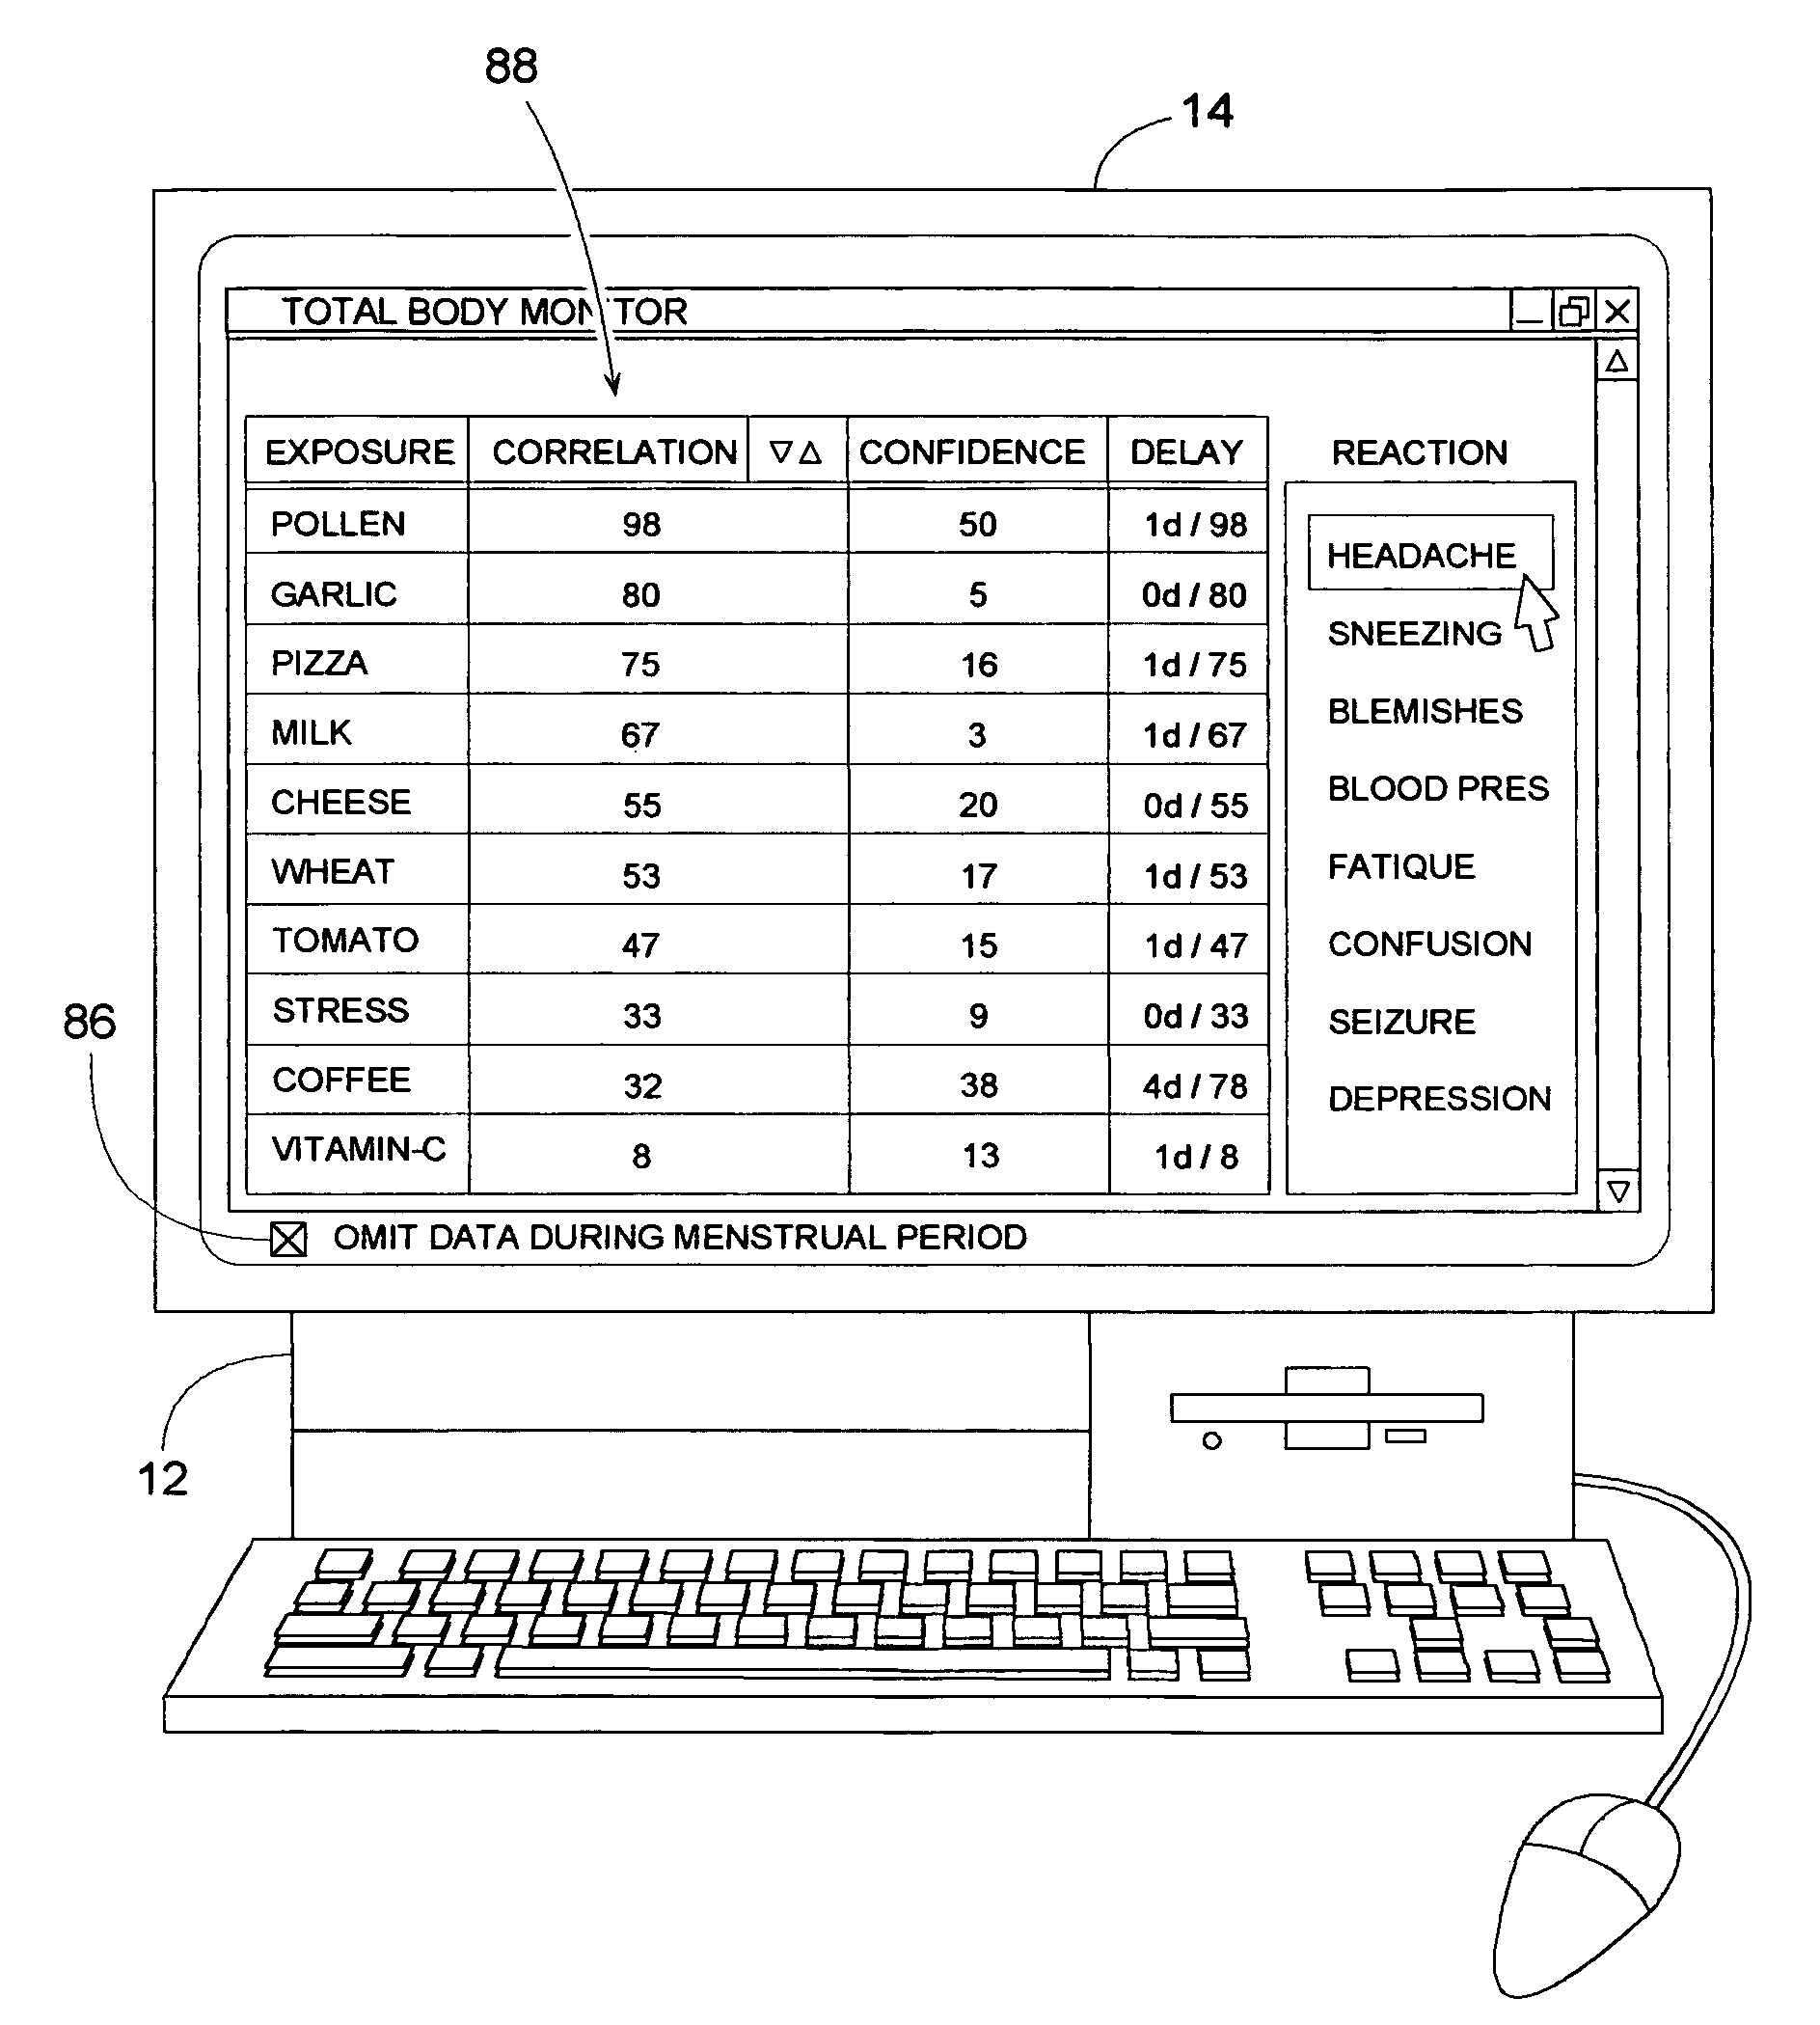 Method for identifying allergens and other influencing agents that may cause a reaction